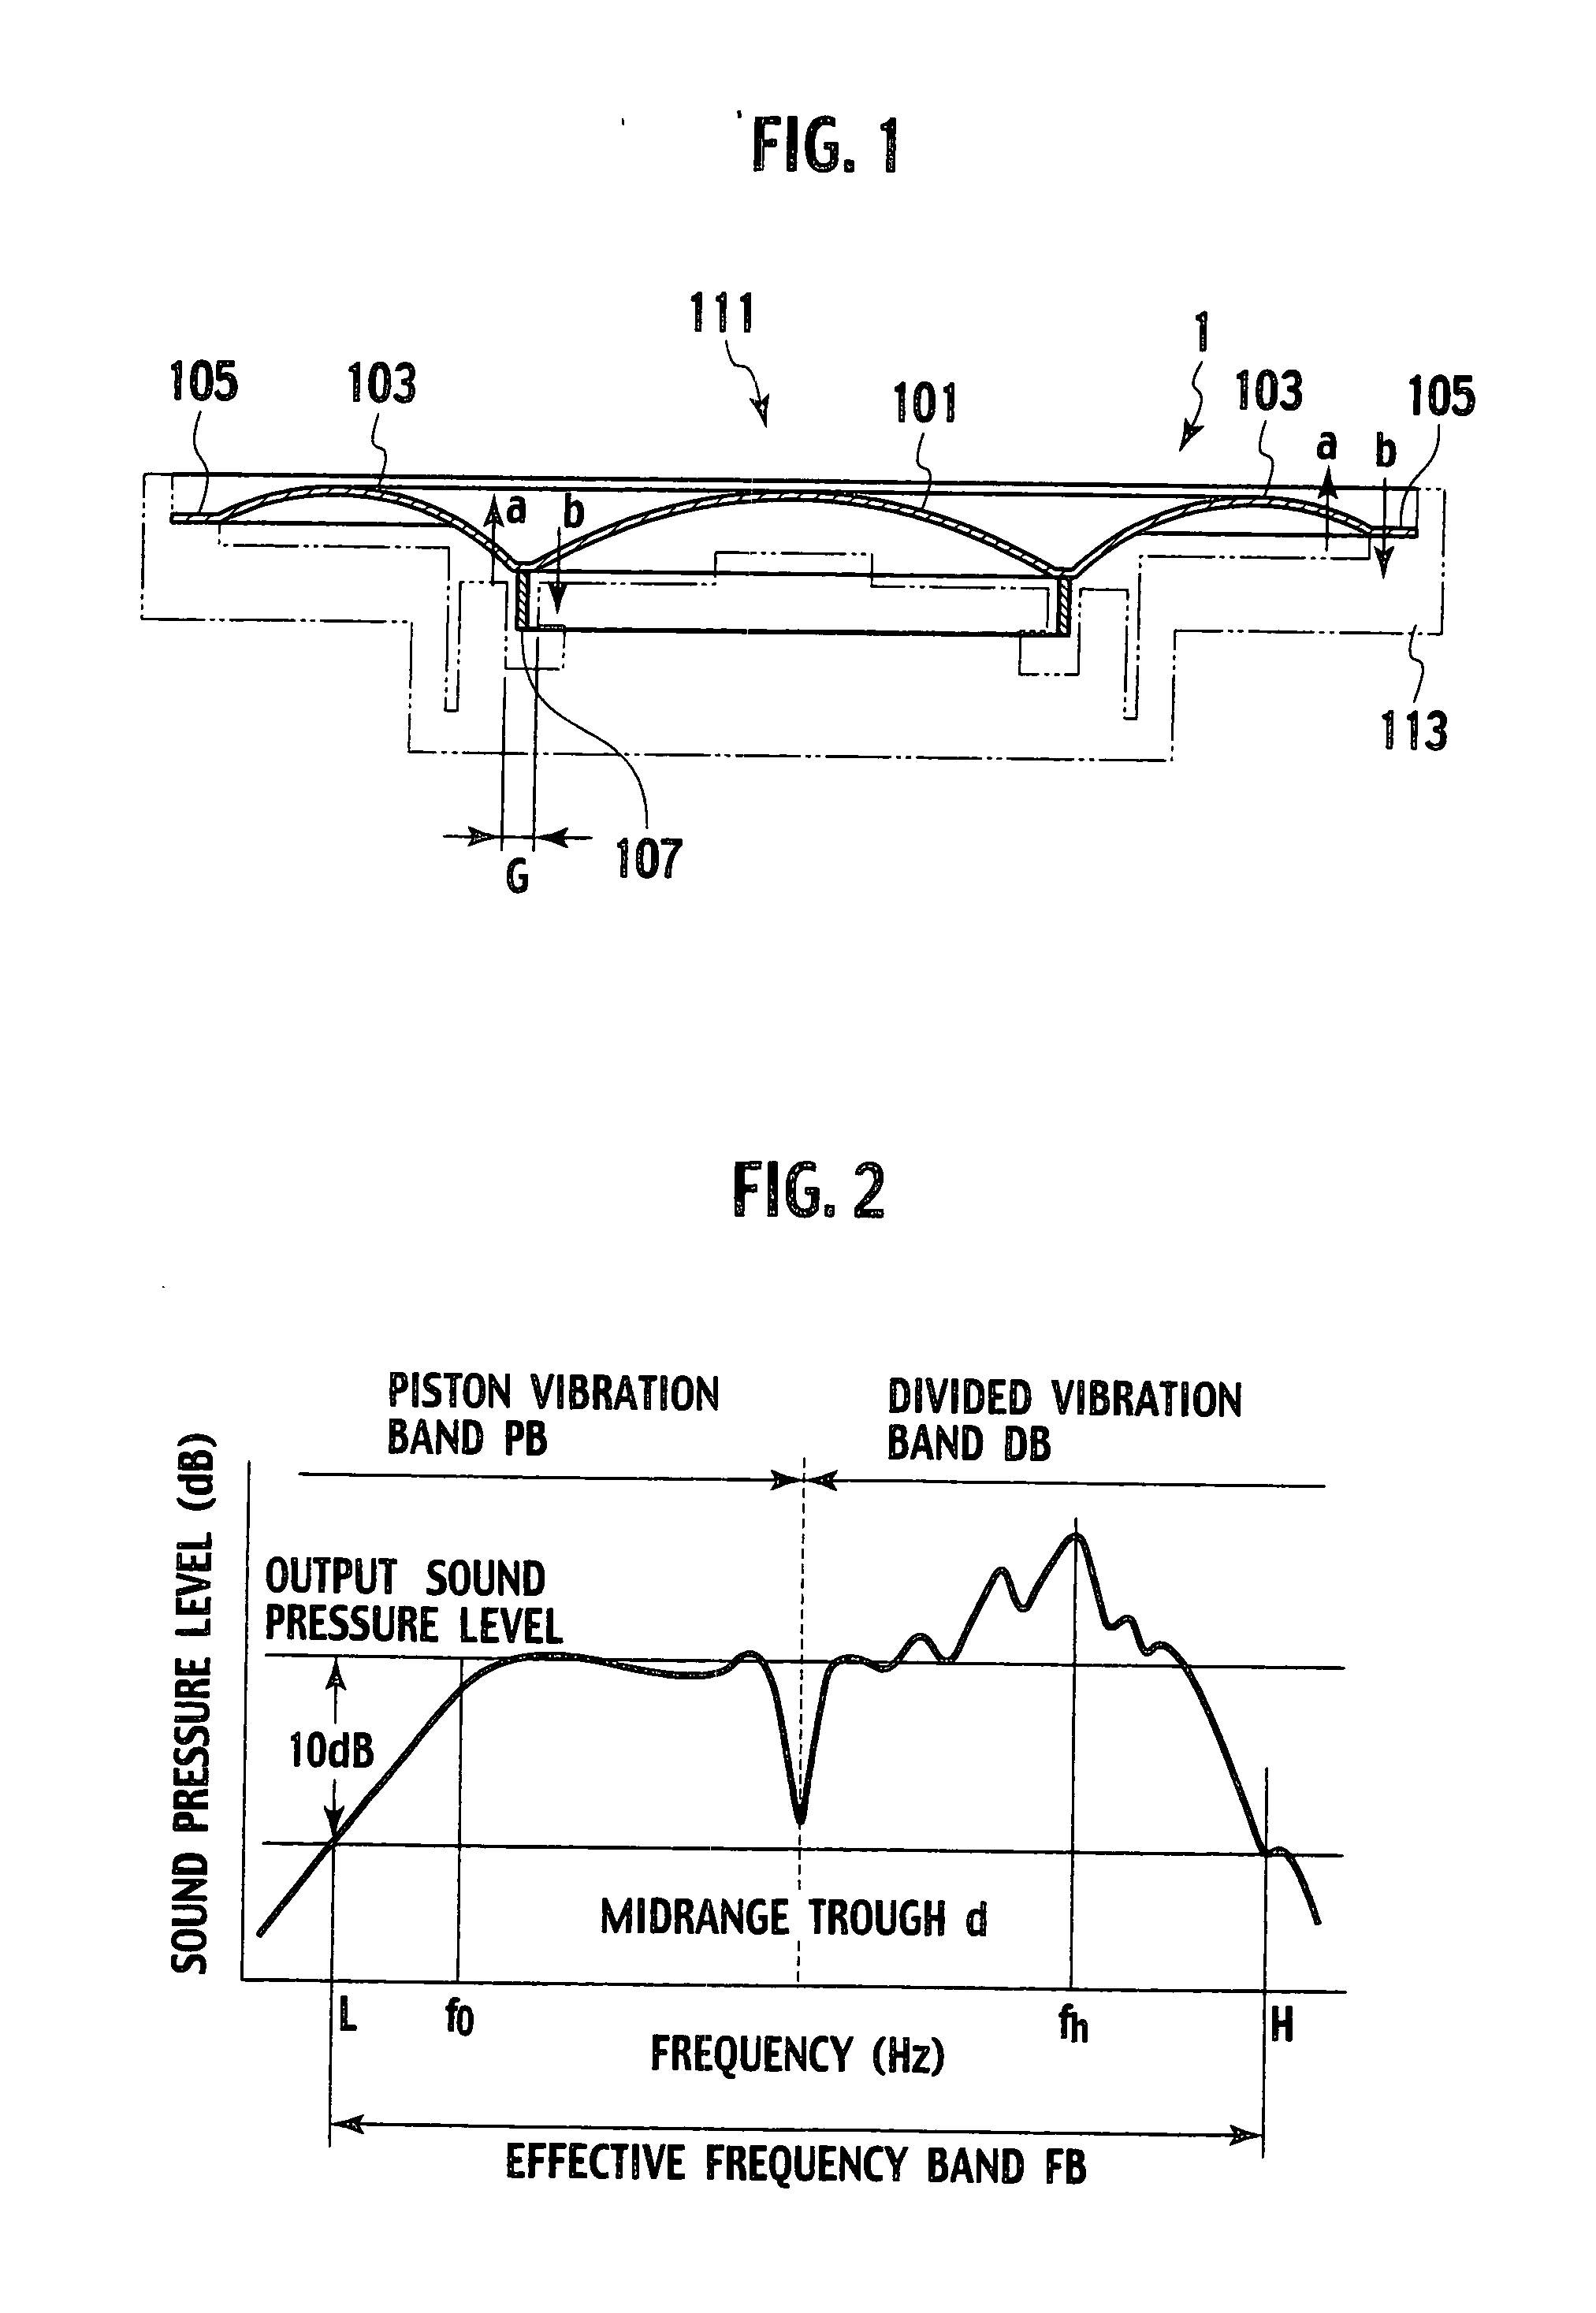 Electroacoustic transducer and diaphragm